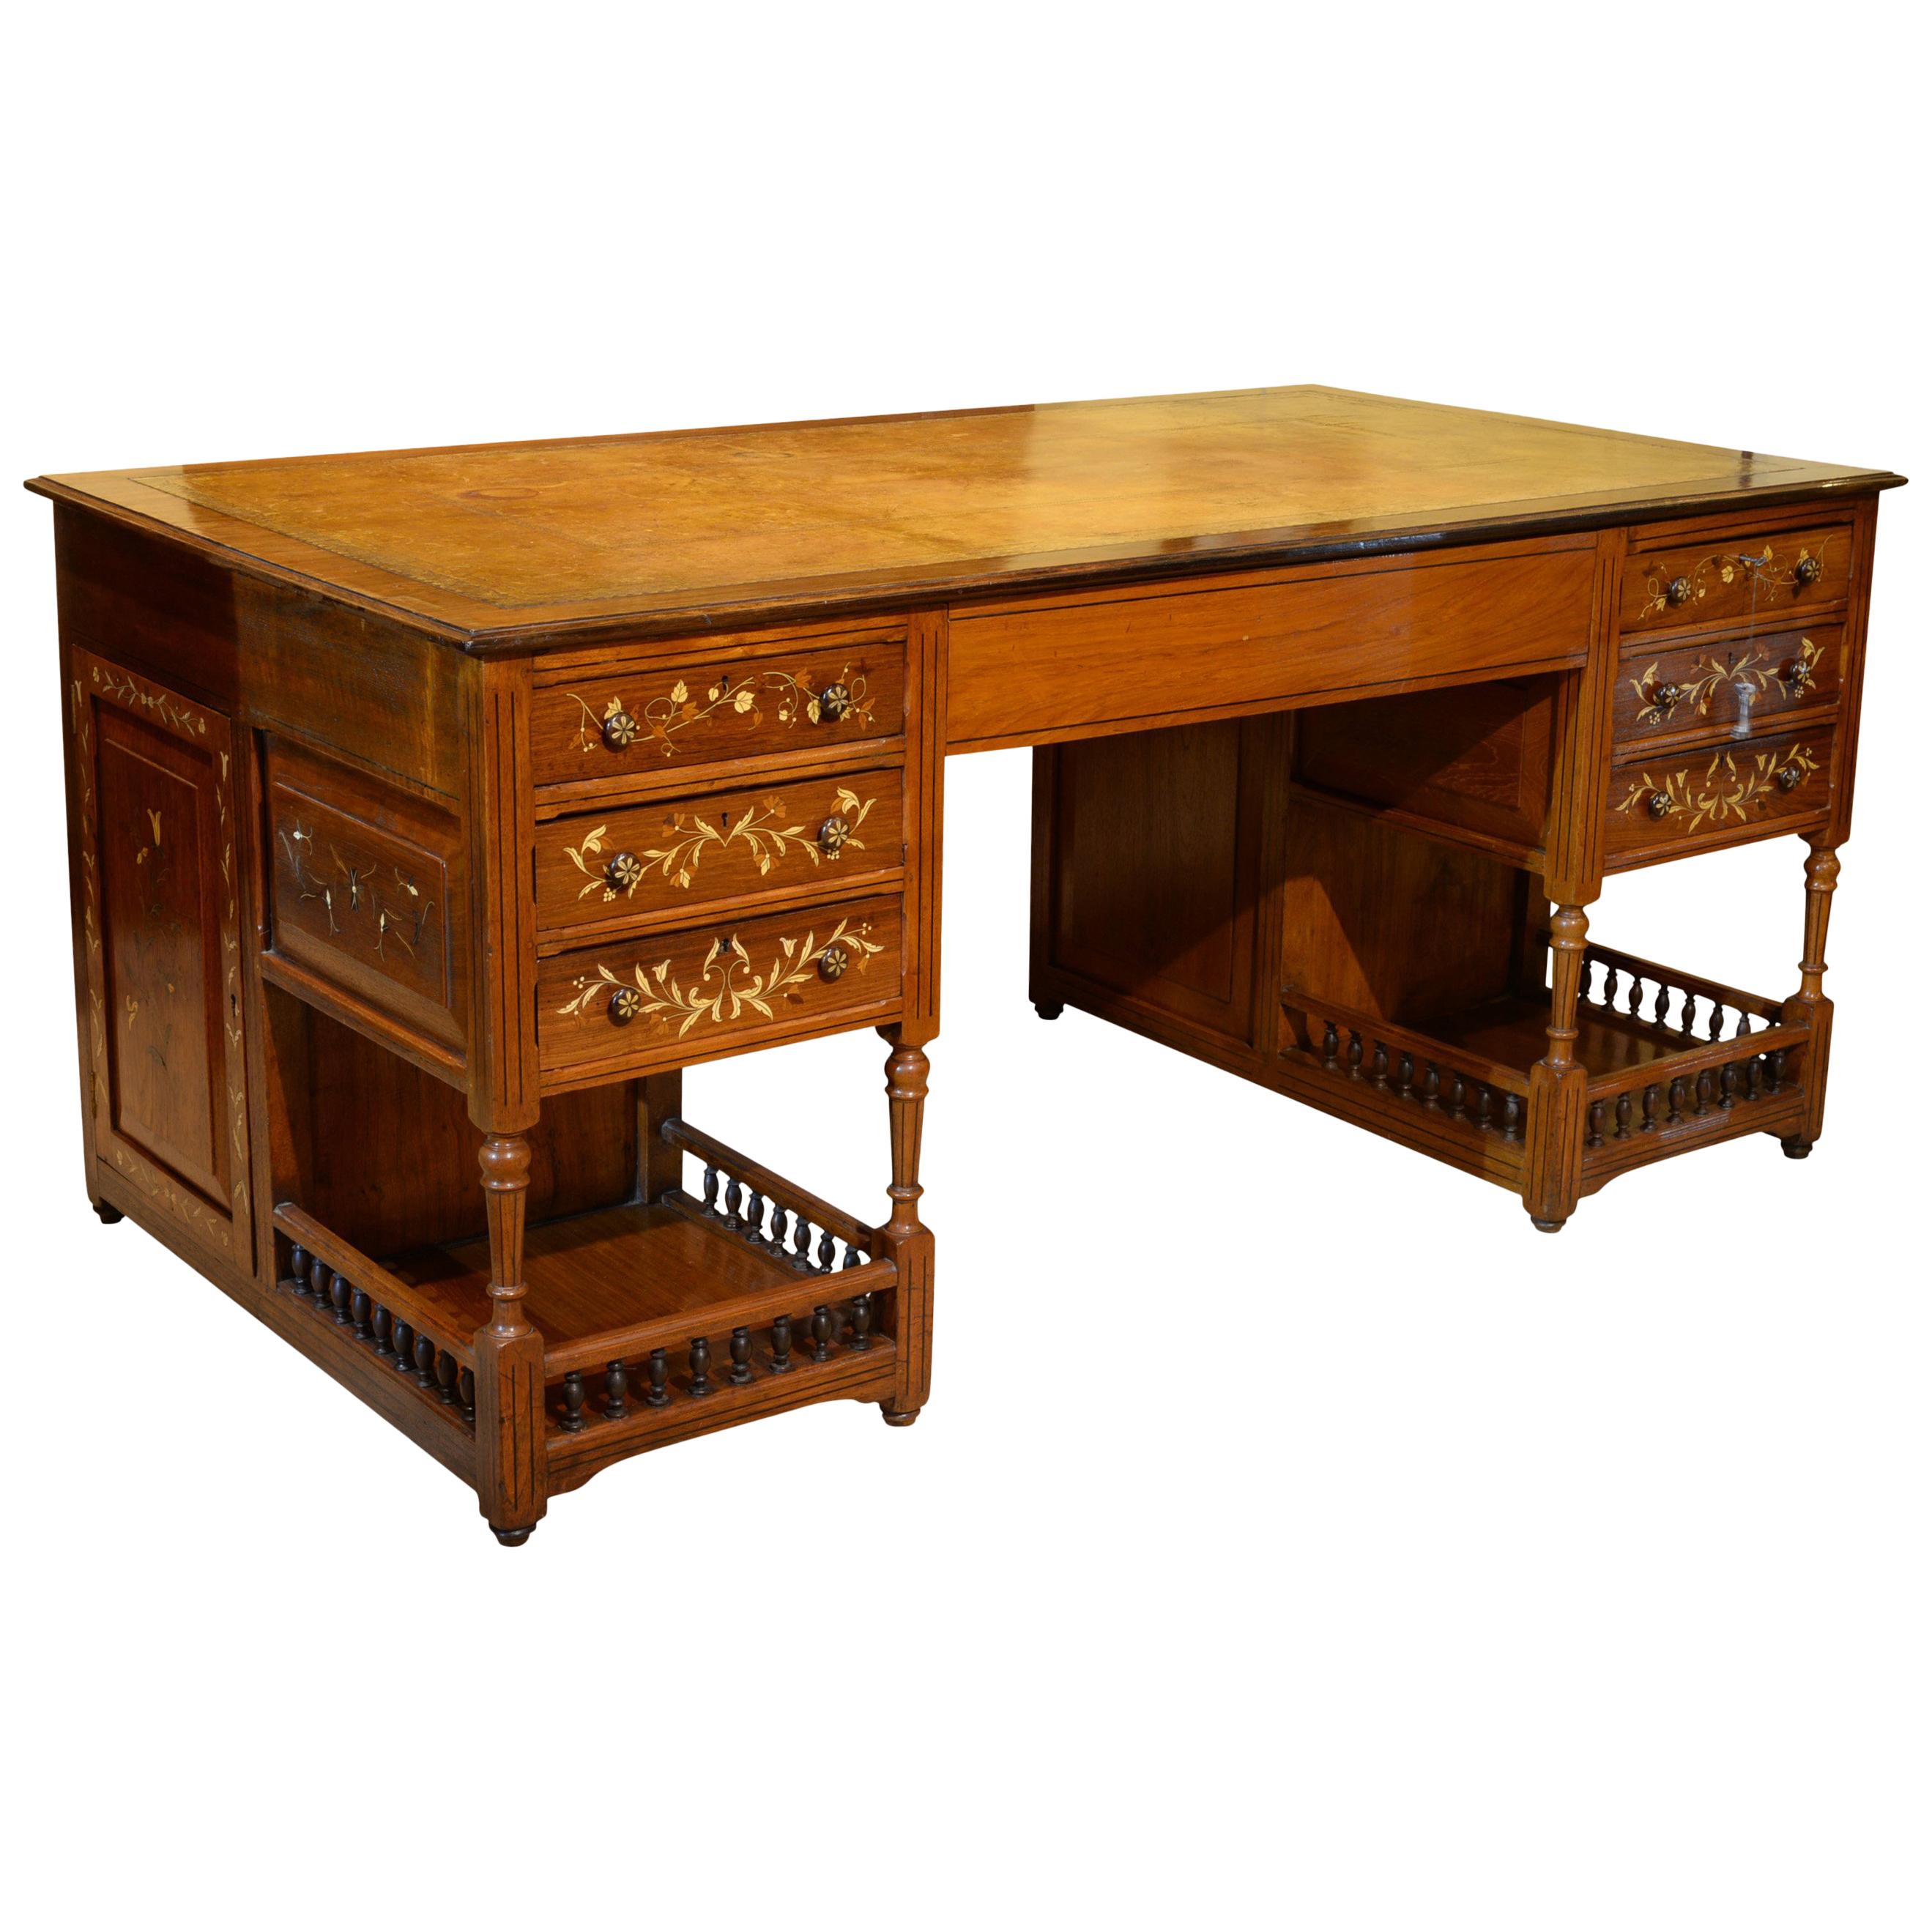 19th Century Anglo-Indian Hardwood Partners Desk For Sale